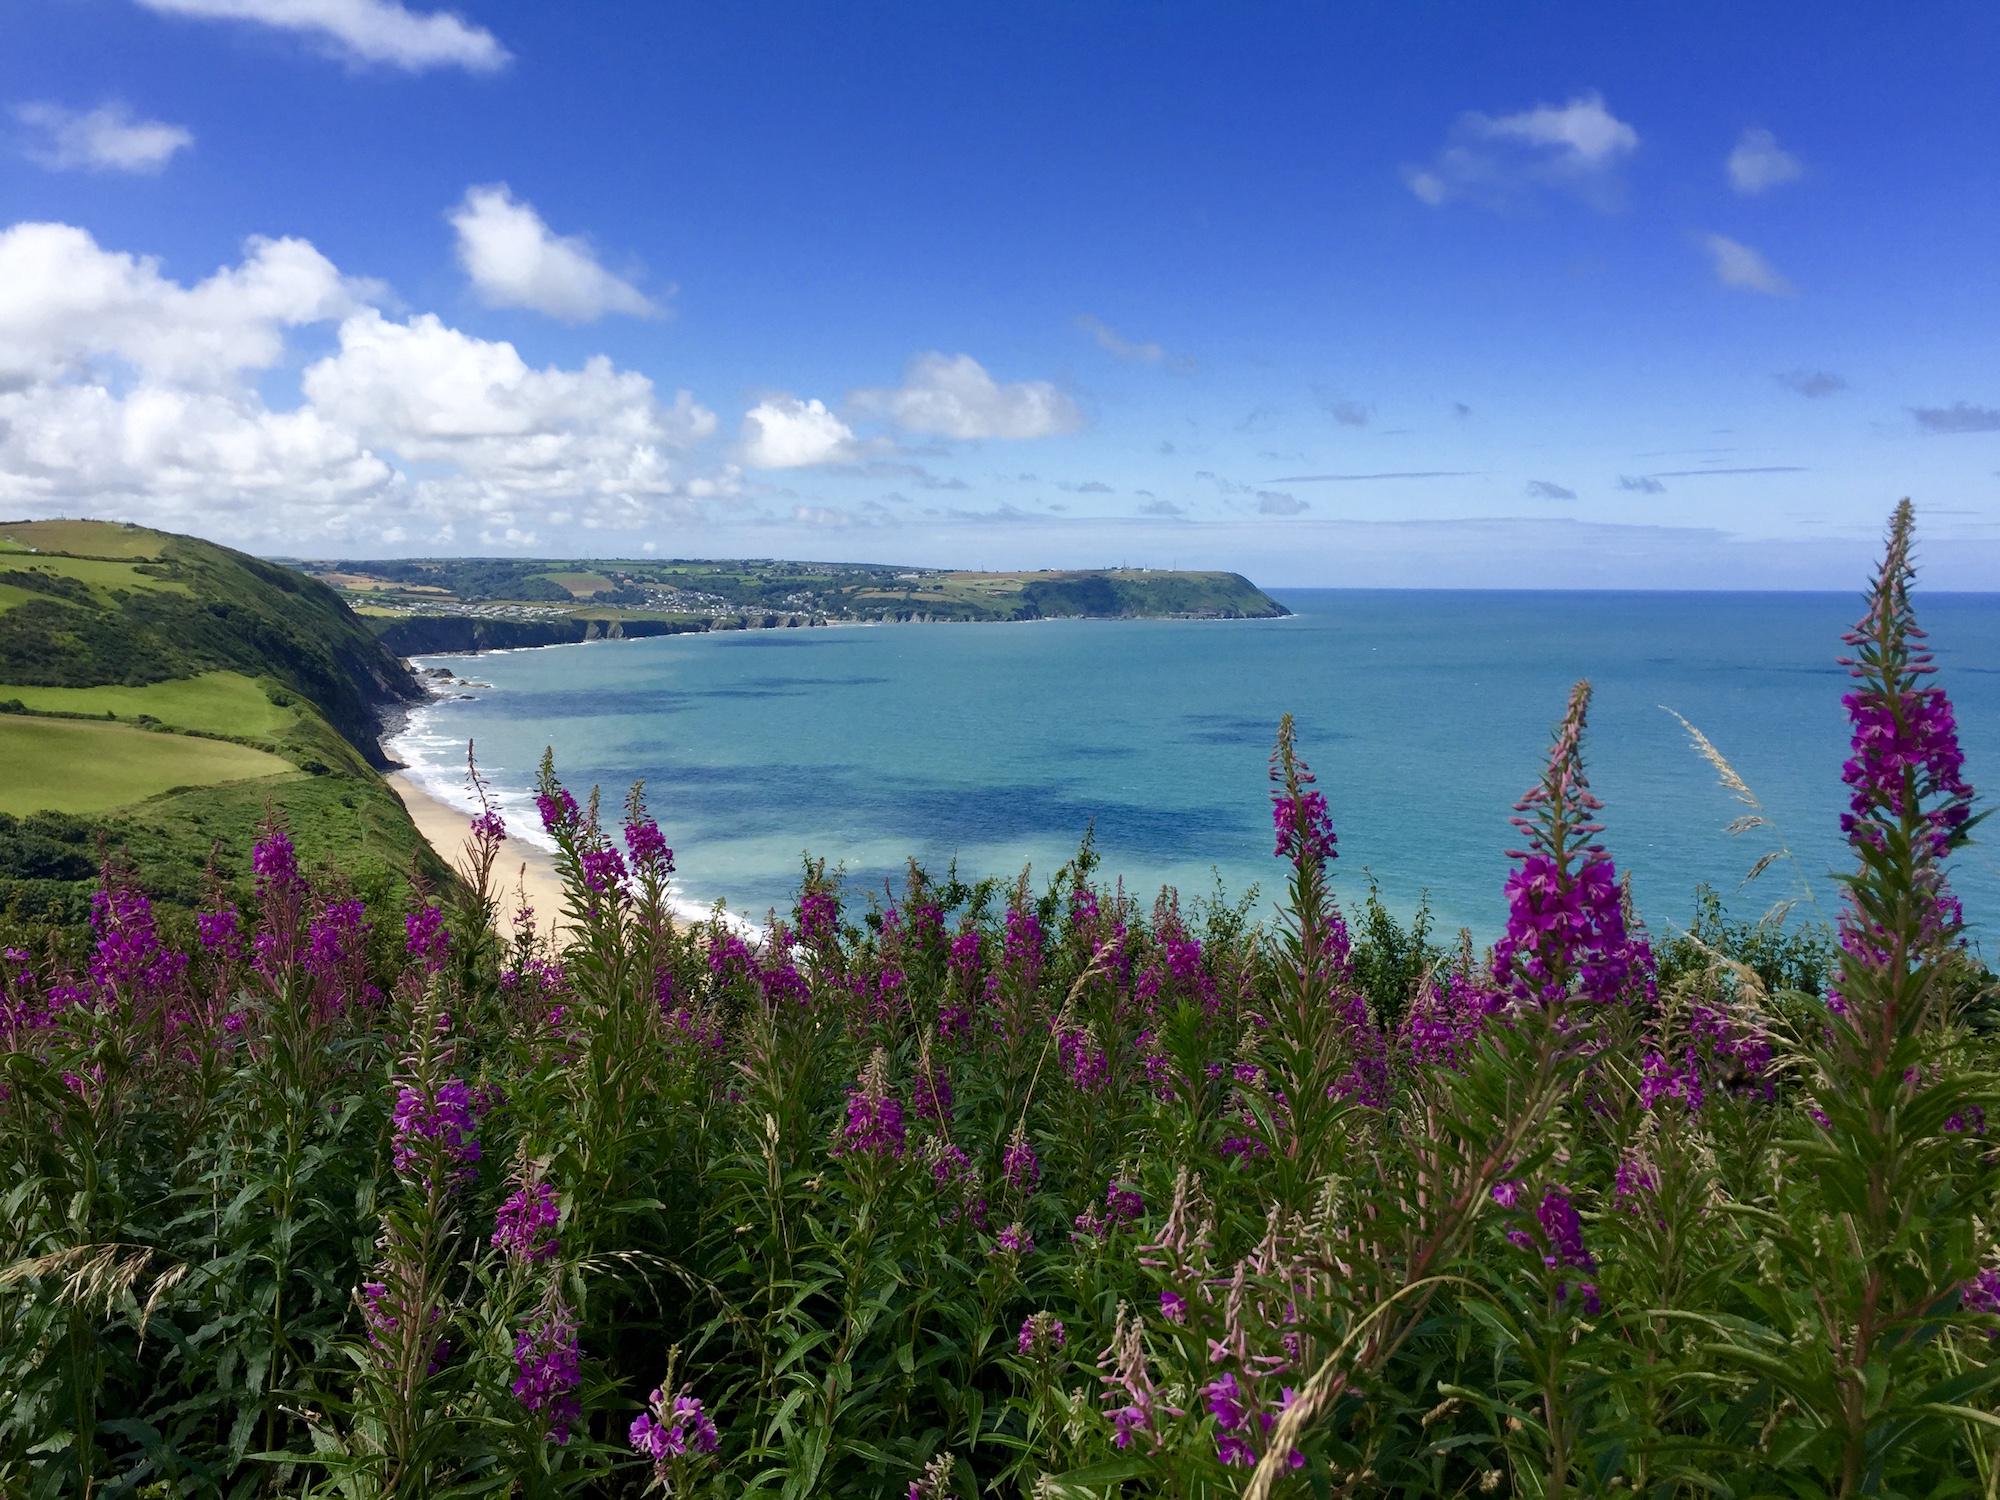 Hotels, Cottages, B&Bs & Glamping in Ceredigion